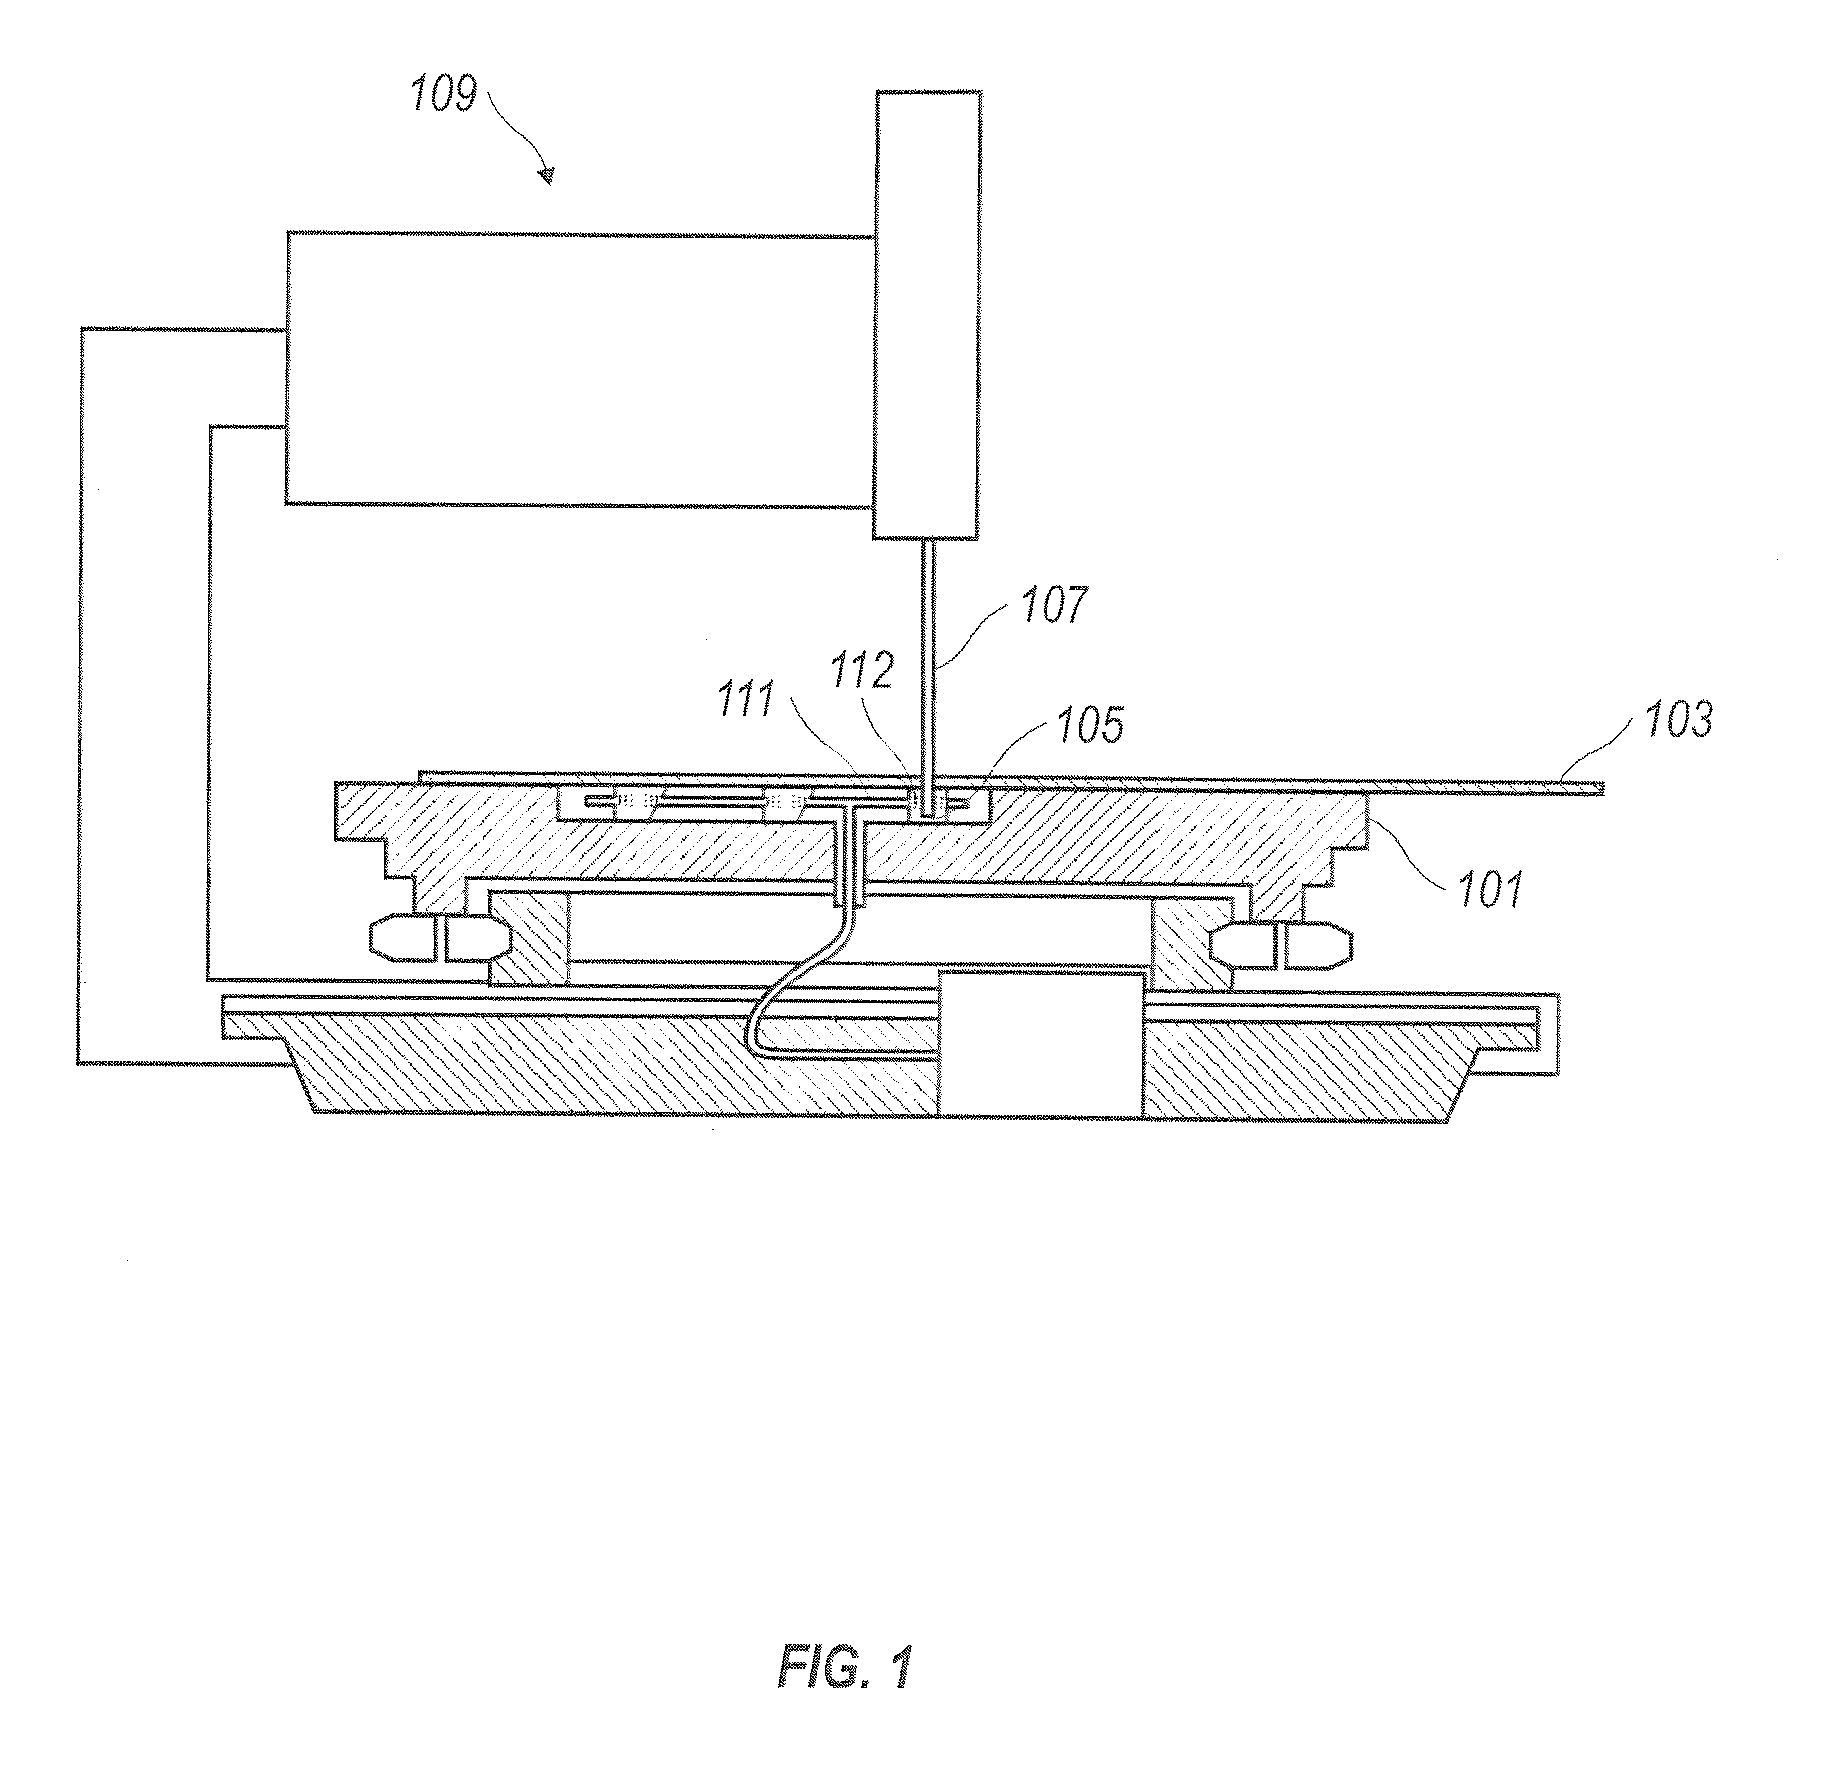 Cutting machine with a liquid lubrication delivery system having a controlled liquid level